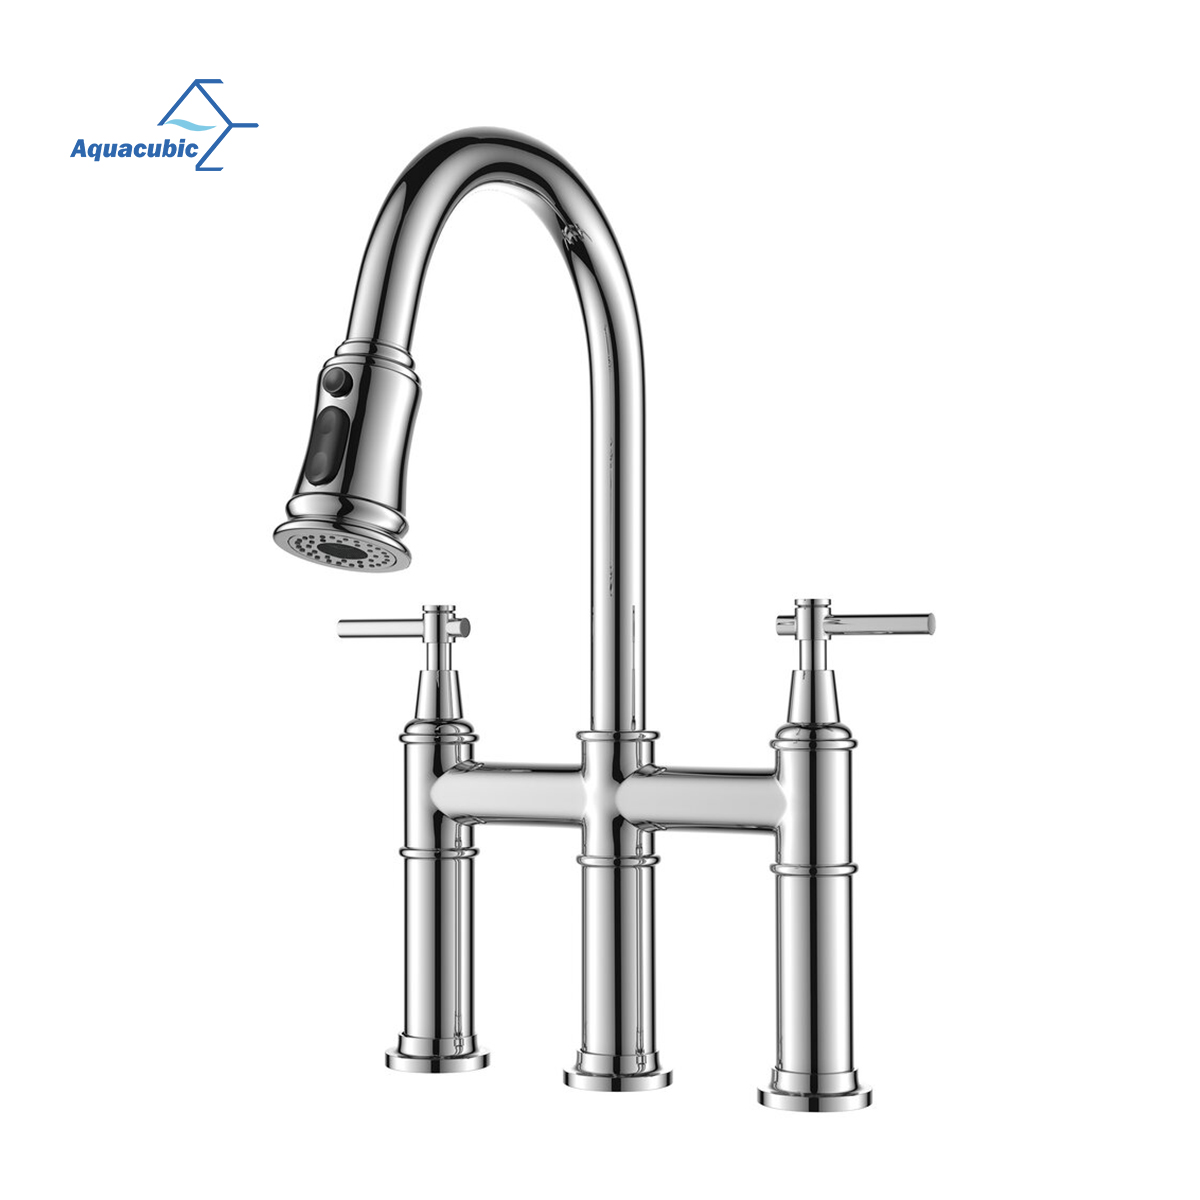 Transitional Bridge Kitchen Faucet with Pull-Down Sprayhead in Matte Black